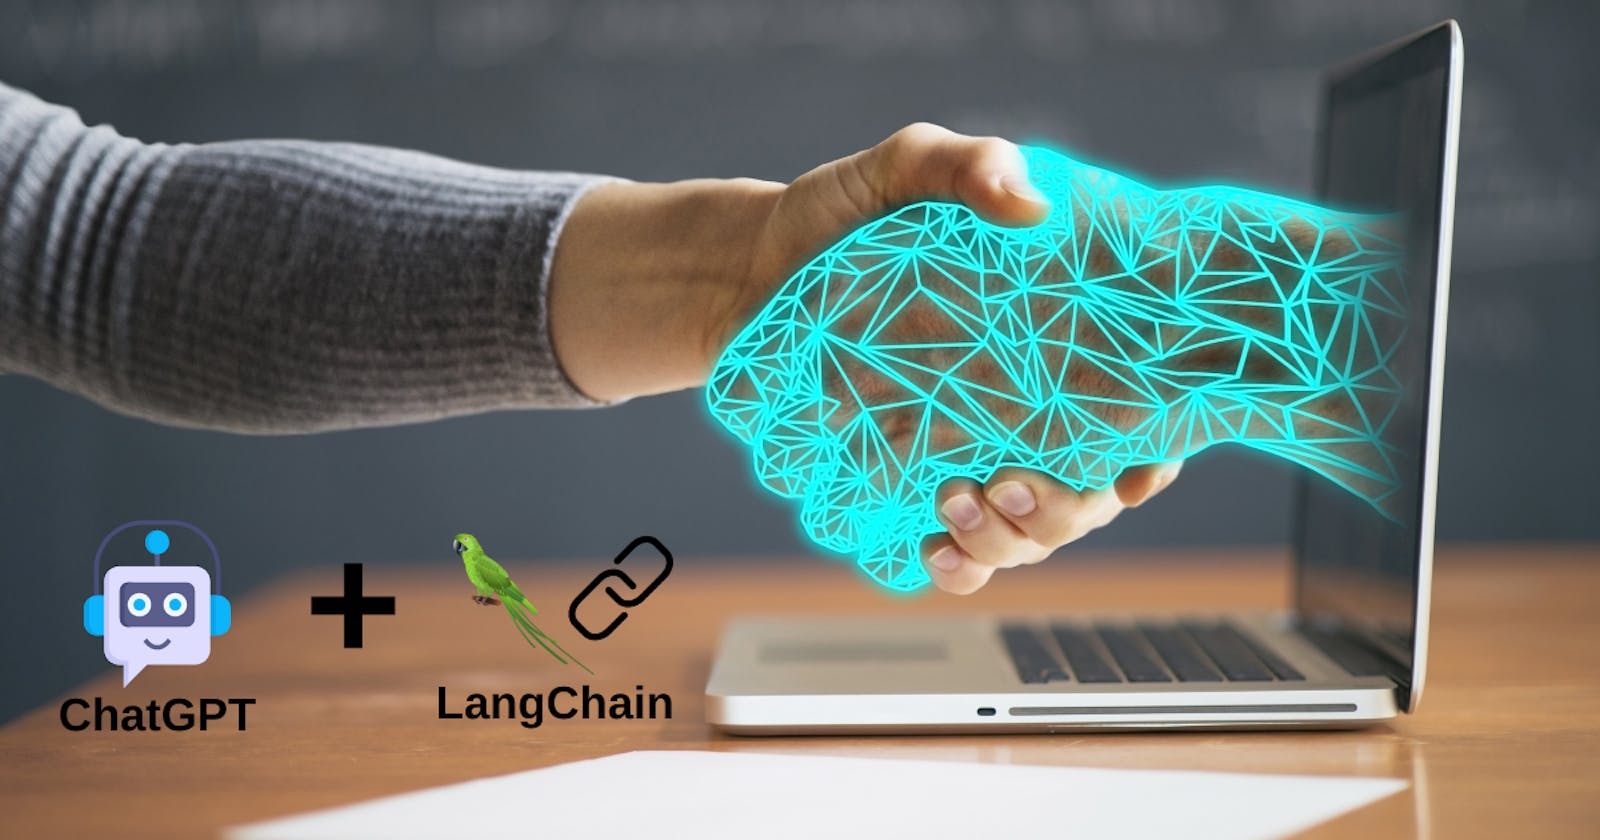 ChatGPT with Langchain: An Overview